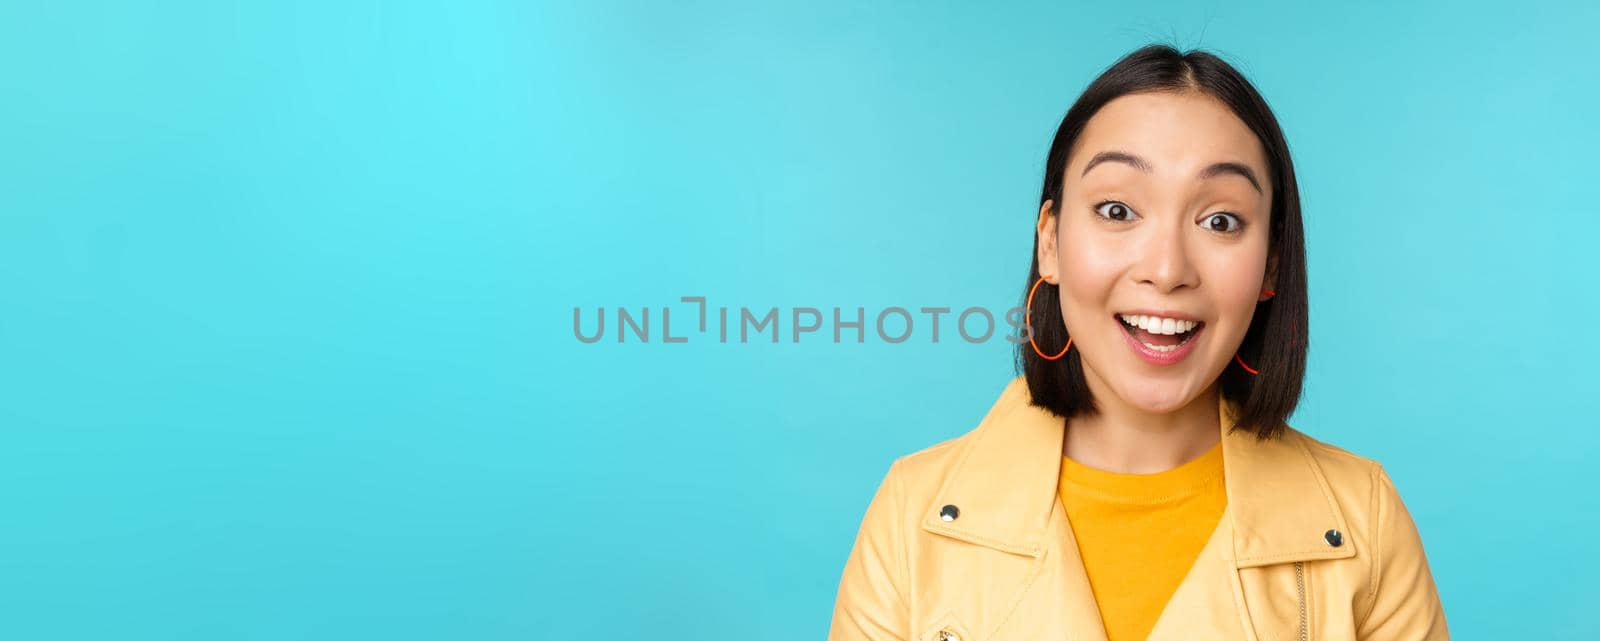 Close up portrait of natural asian girl laughing, smiling and looking happy, standing over blue background. Copy space